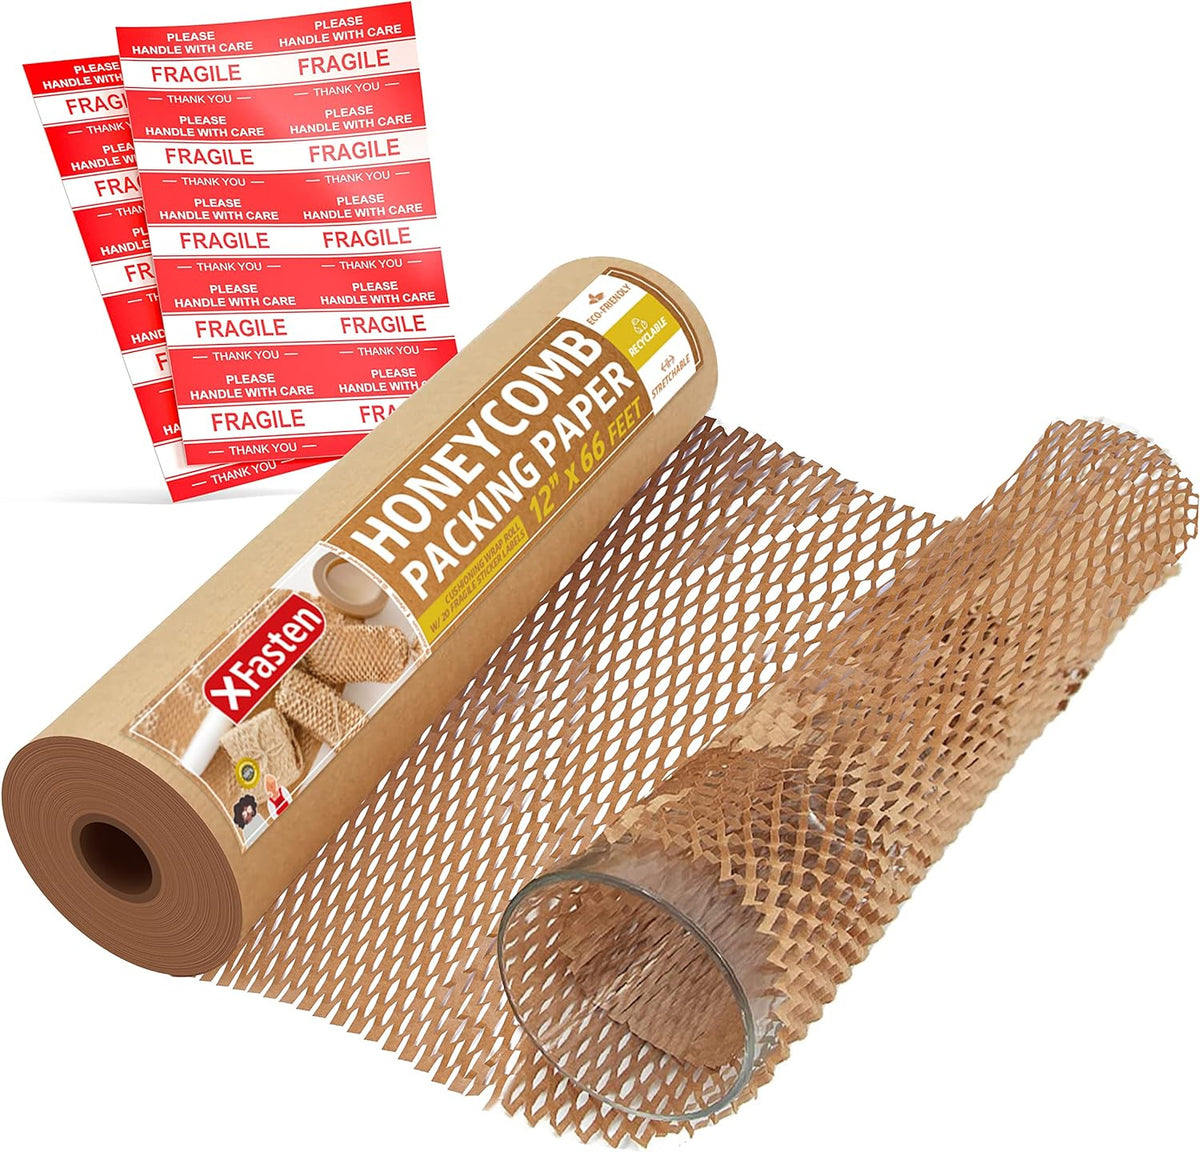 MUNBYN Honeycomb Packing Paper